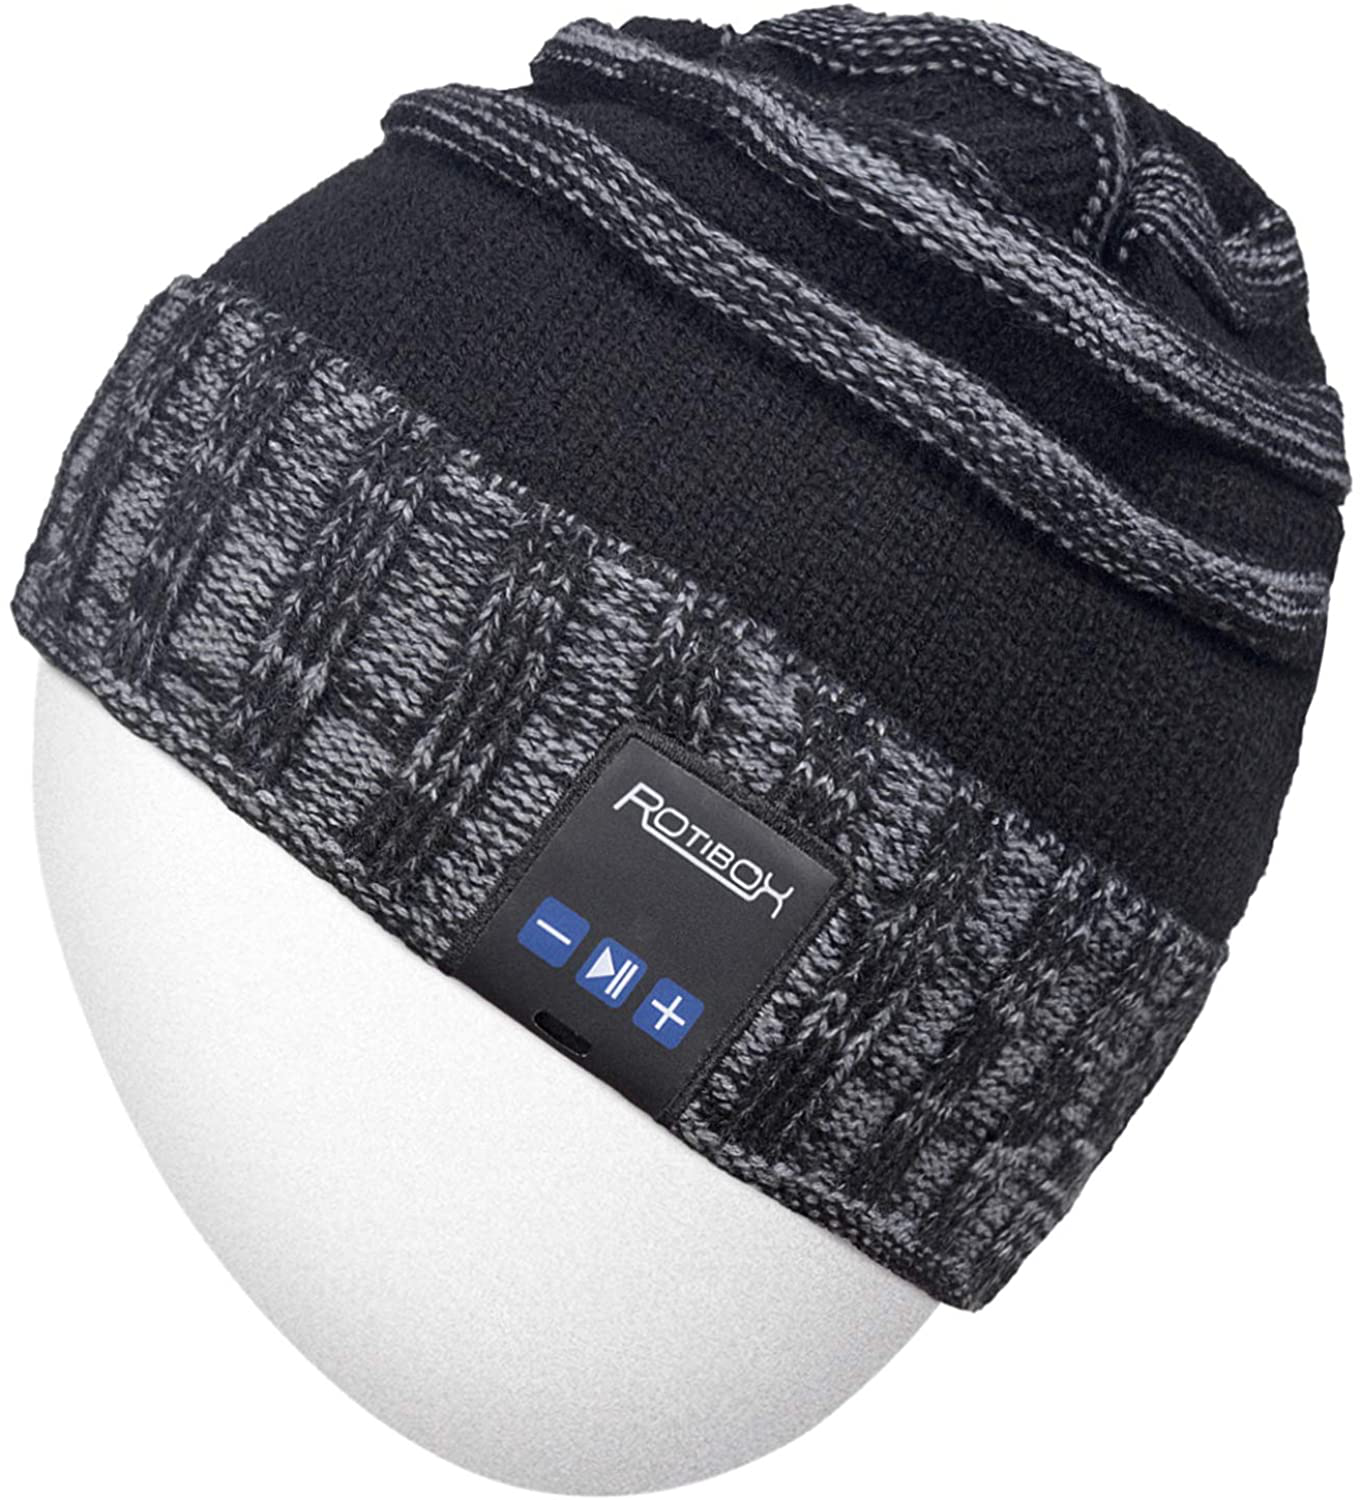 Rotibox Bluetooth Beanie Hat Wireless Headphone for Outdoor Sports Xmas Gifts